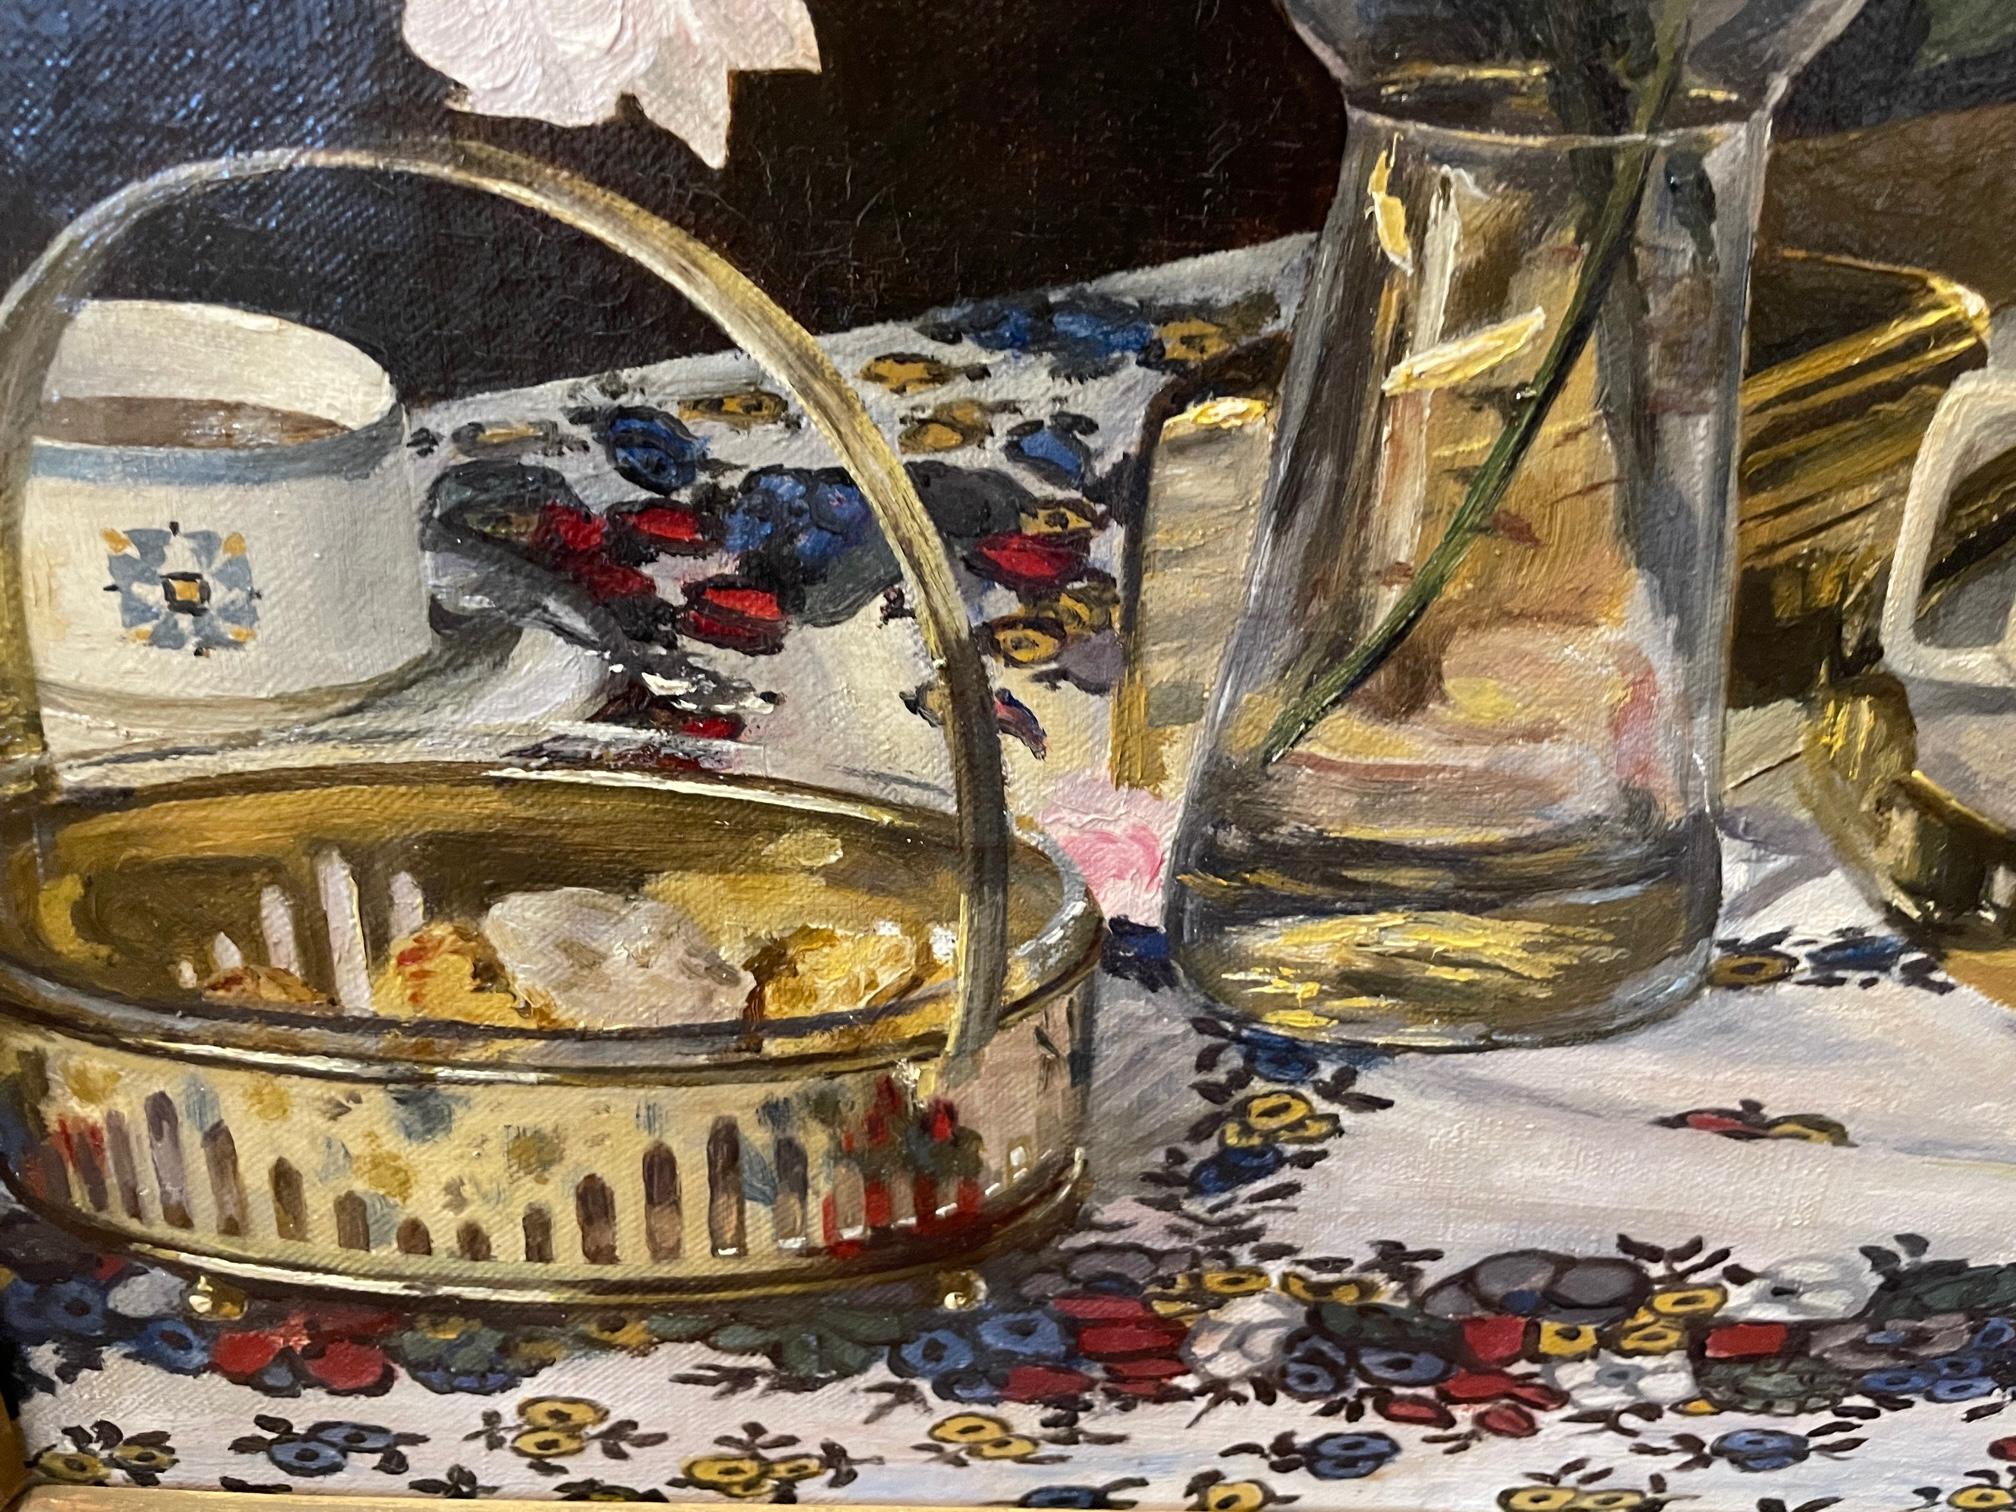 Dutch teatime service, Het Servies, demonstrates superb contrast with the white service, brilliant color definition in the cloth against the wood panelled walls. Dutch, probably mid 20th century perhaps early 20th century, the oil on canvas comes